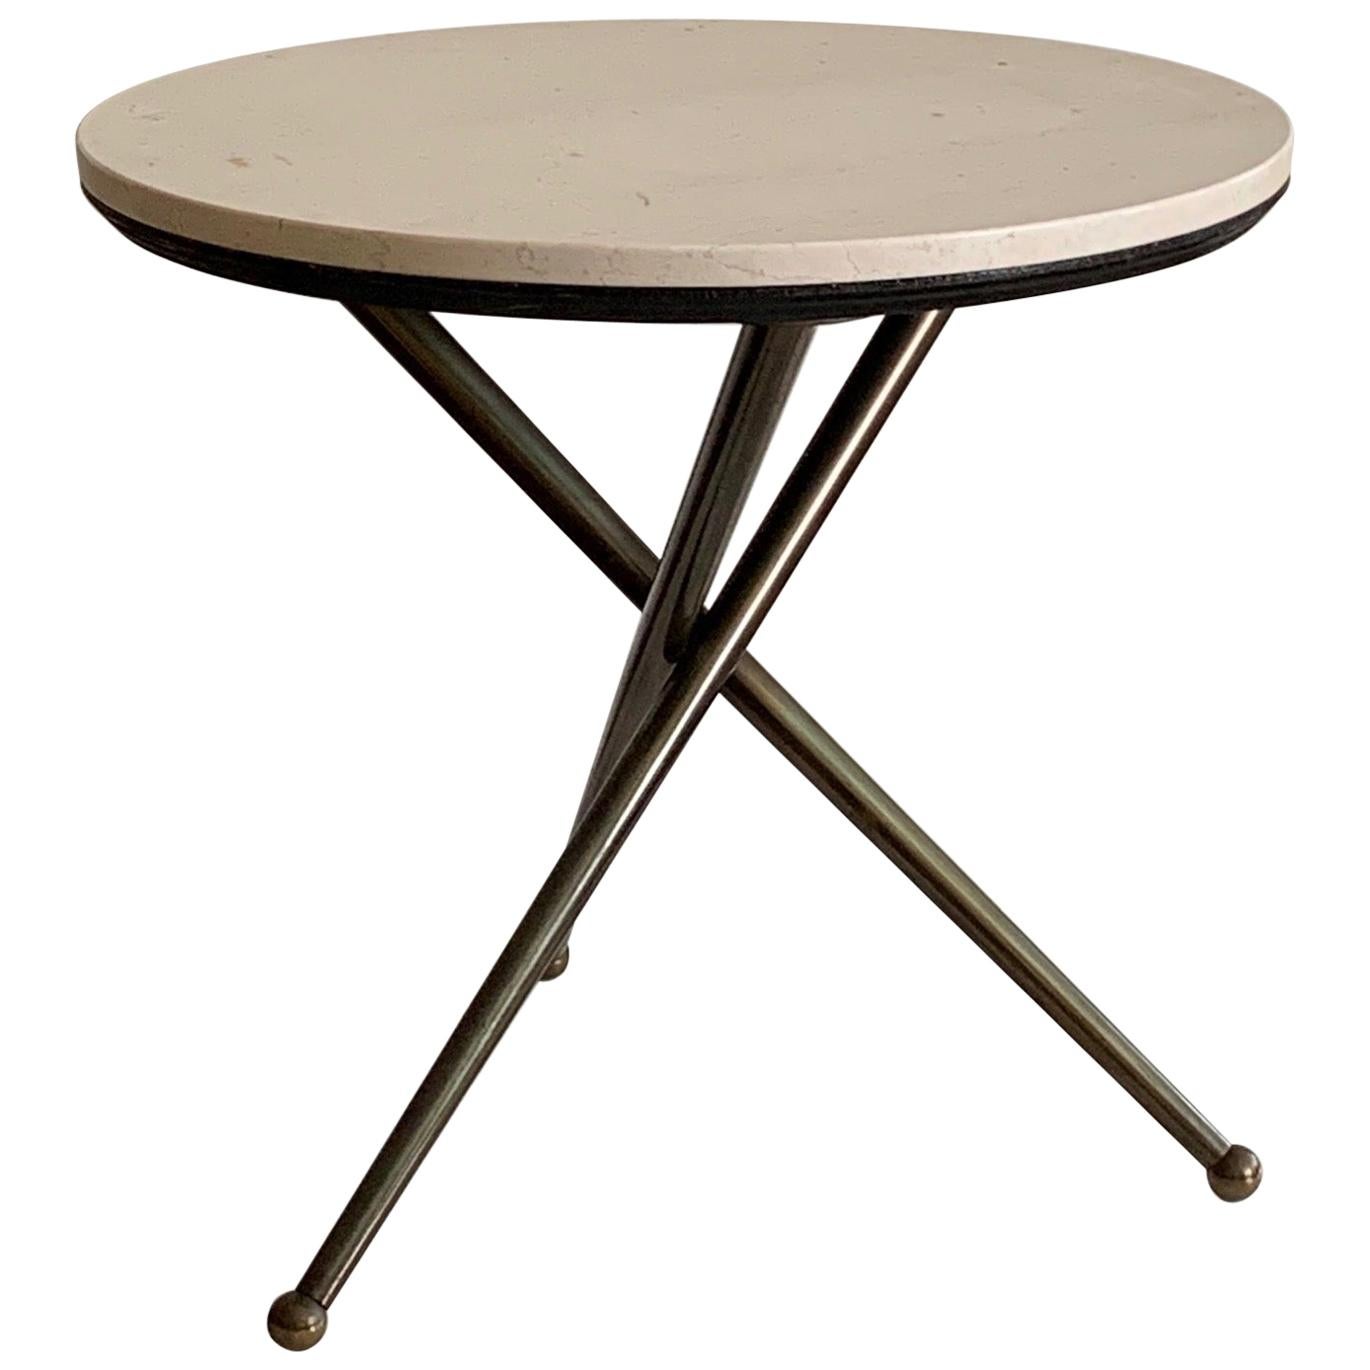 Unusual Italian Tripod Table with a Marble Top